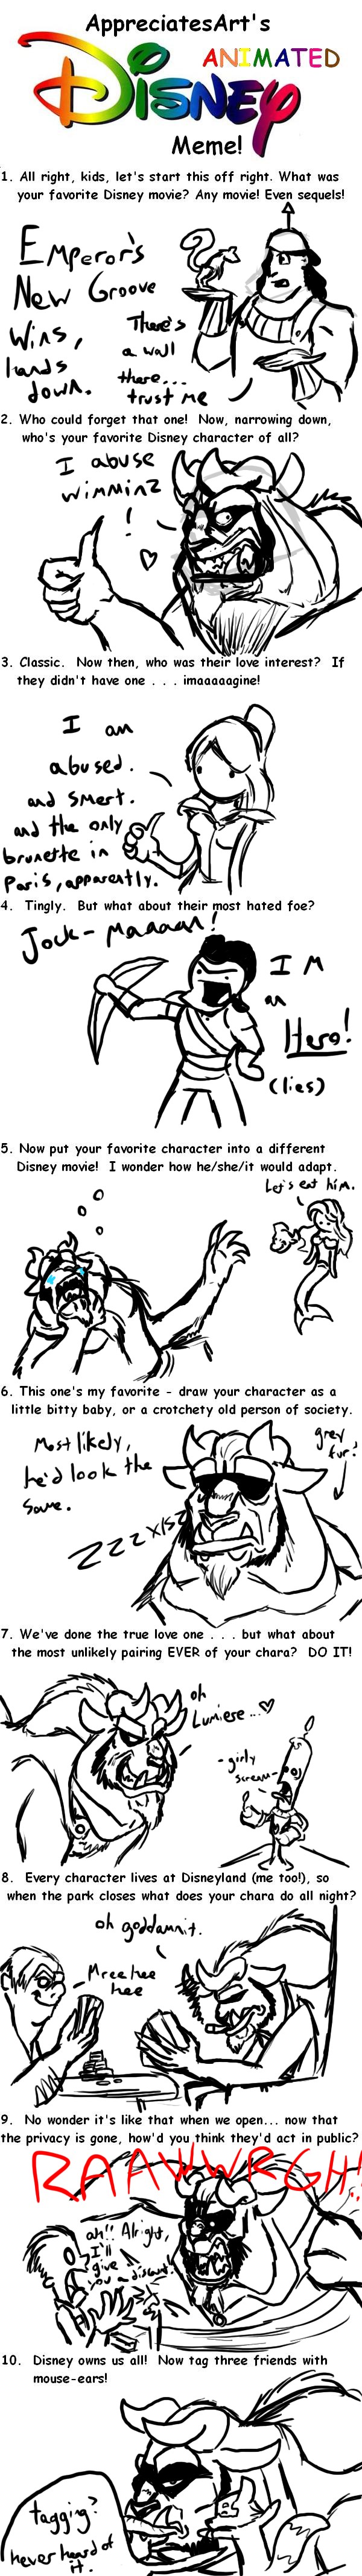 The Disney Meme by TheGameArtCritic